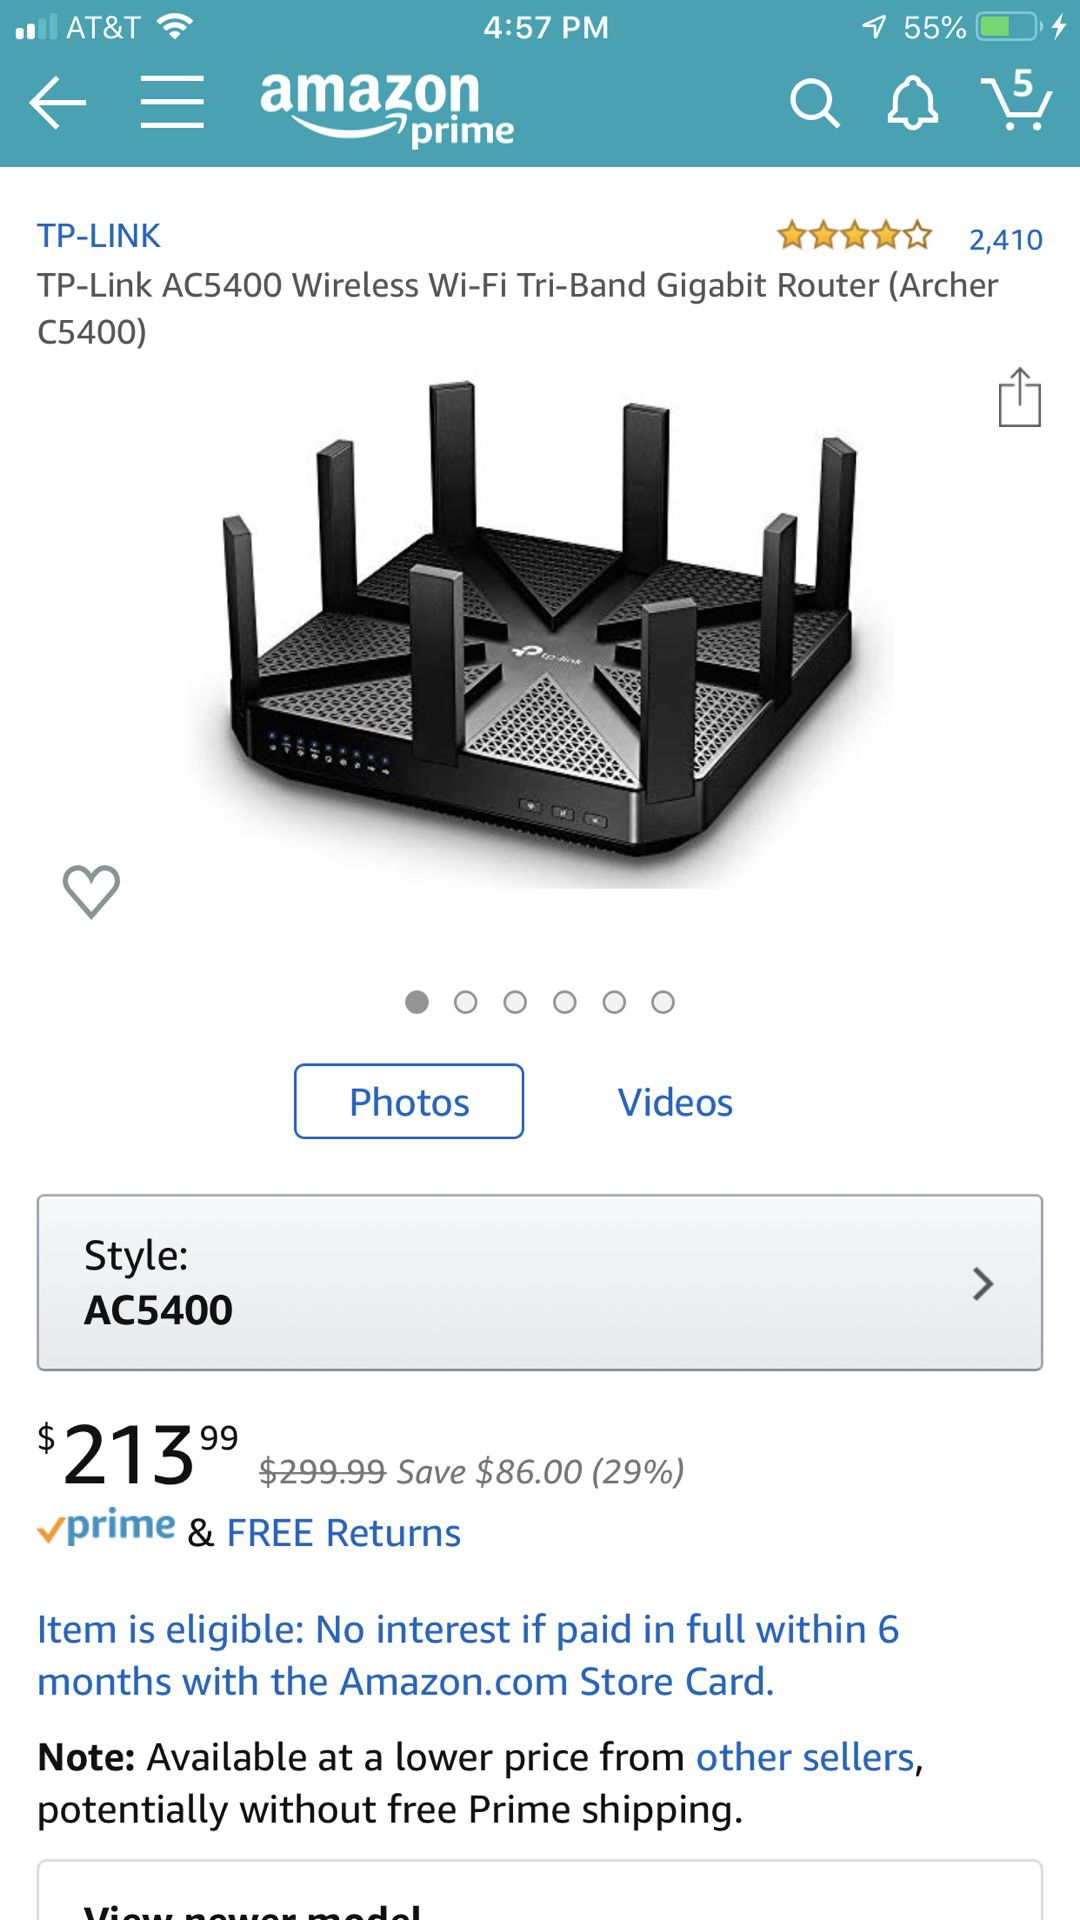 TP LINK TRI BAND ROUTER ACTUALLY THE AC7200 MODEL